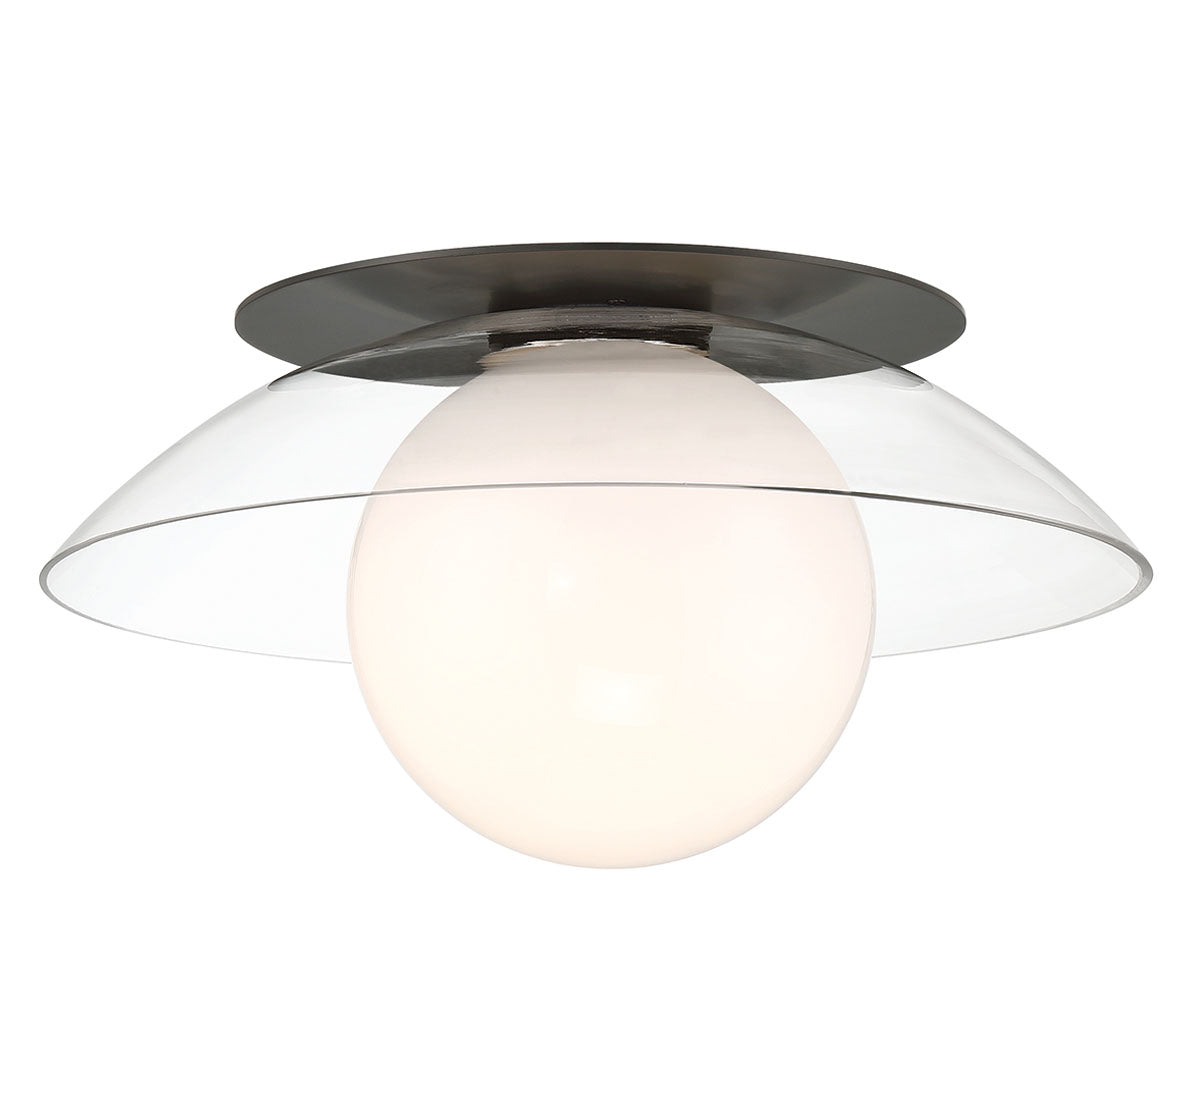 ANCONA 10124-05, Large 1 Light Ceiling/Wall Mount